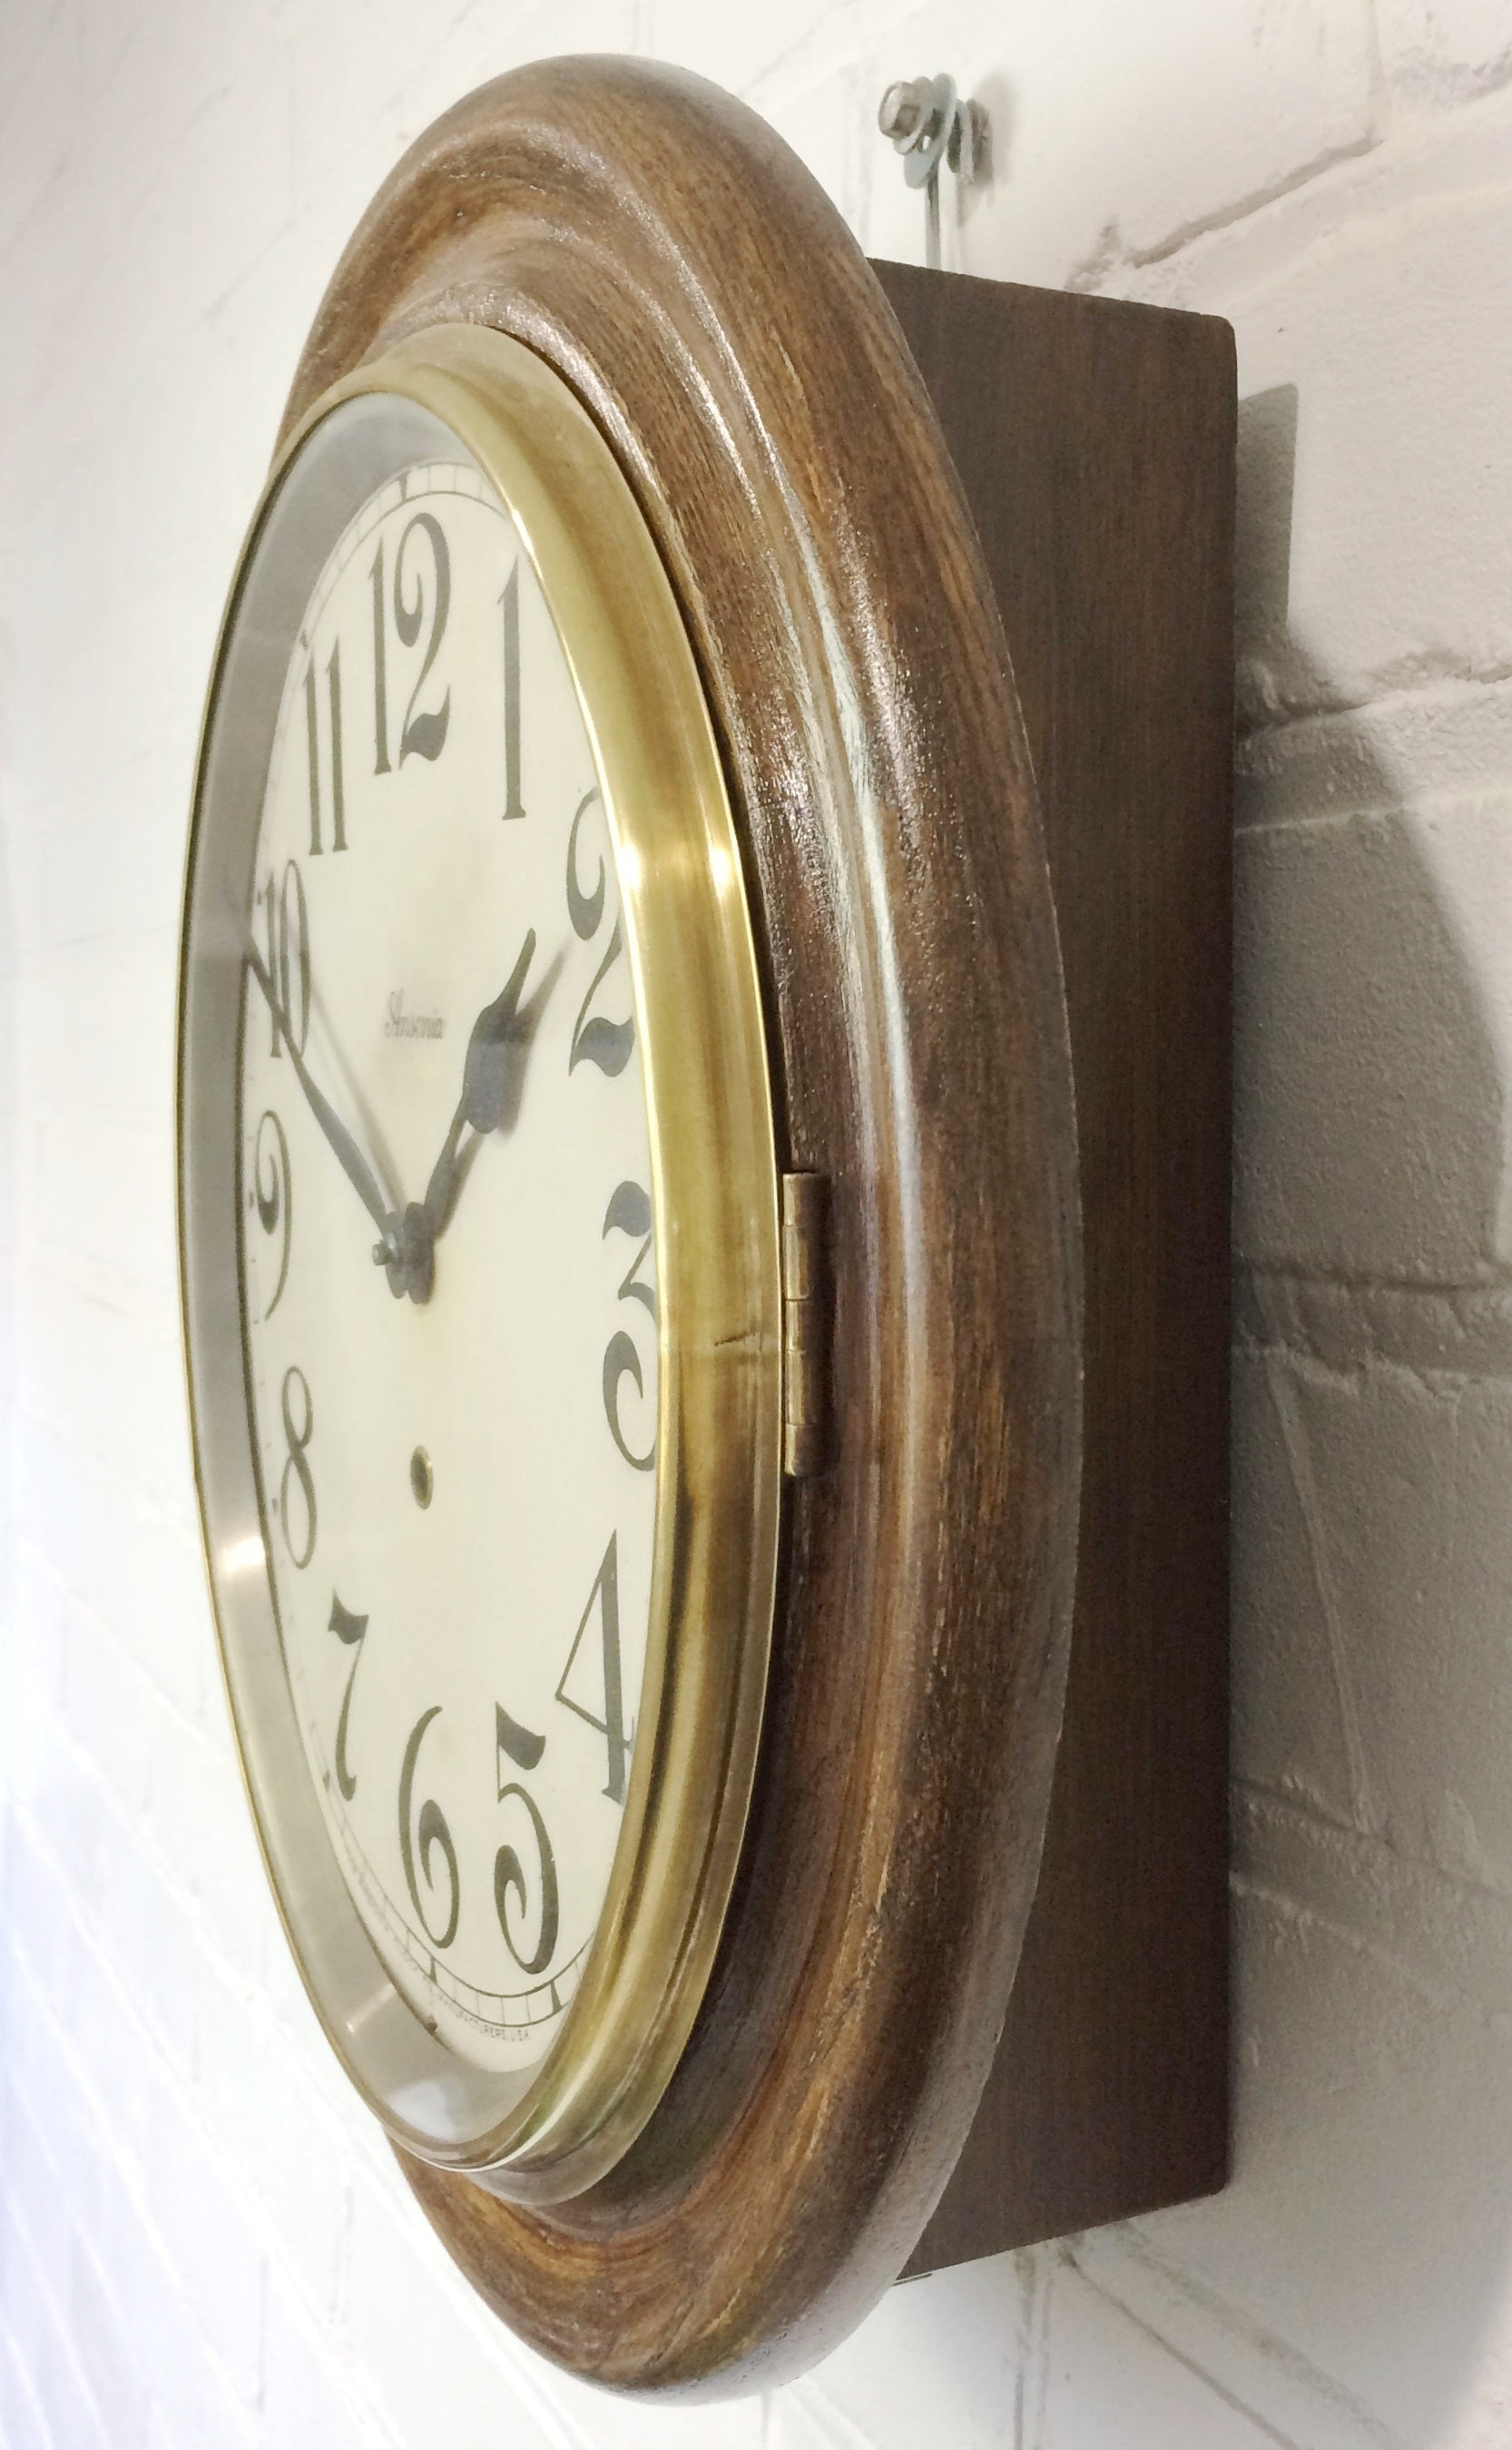 Anitque Ansonia Wall Clock | eXibit collection